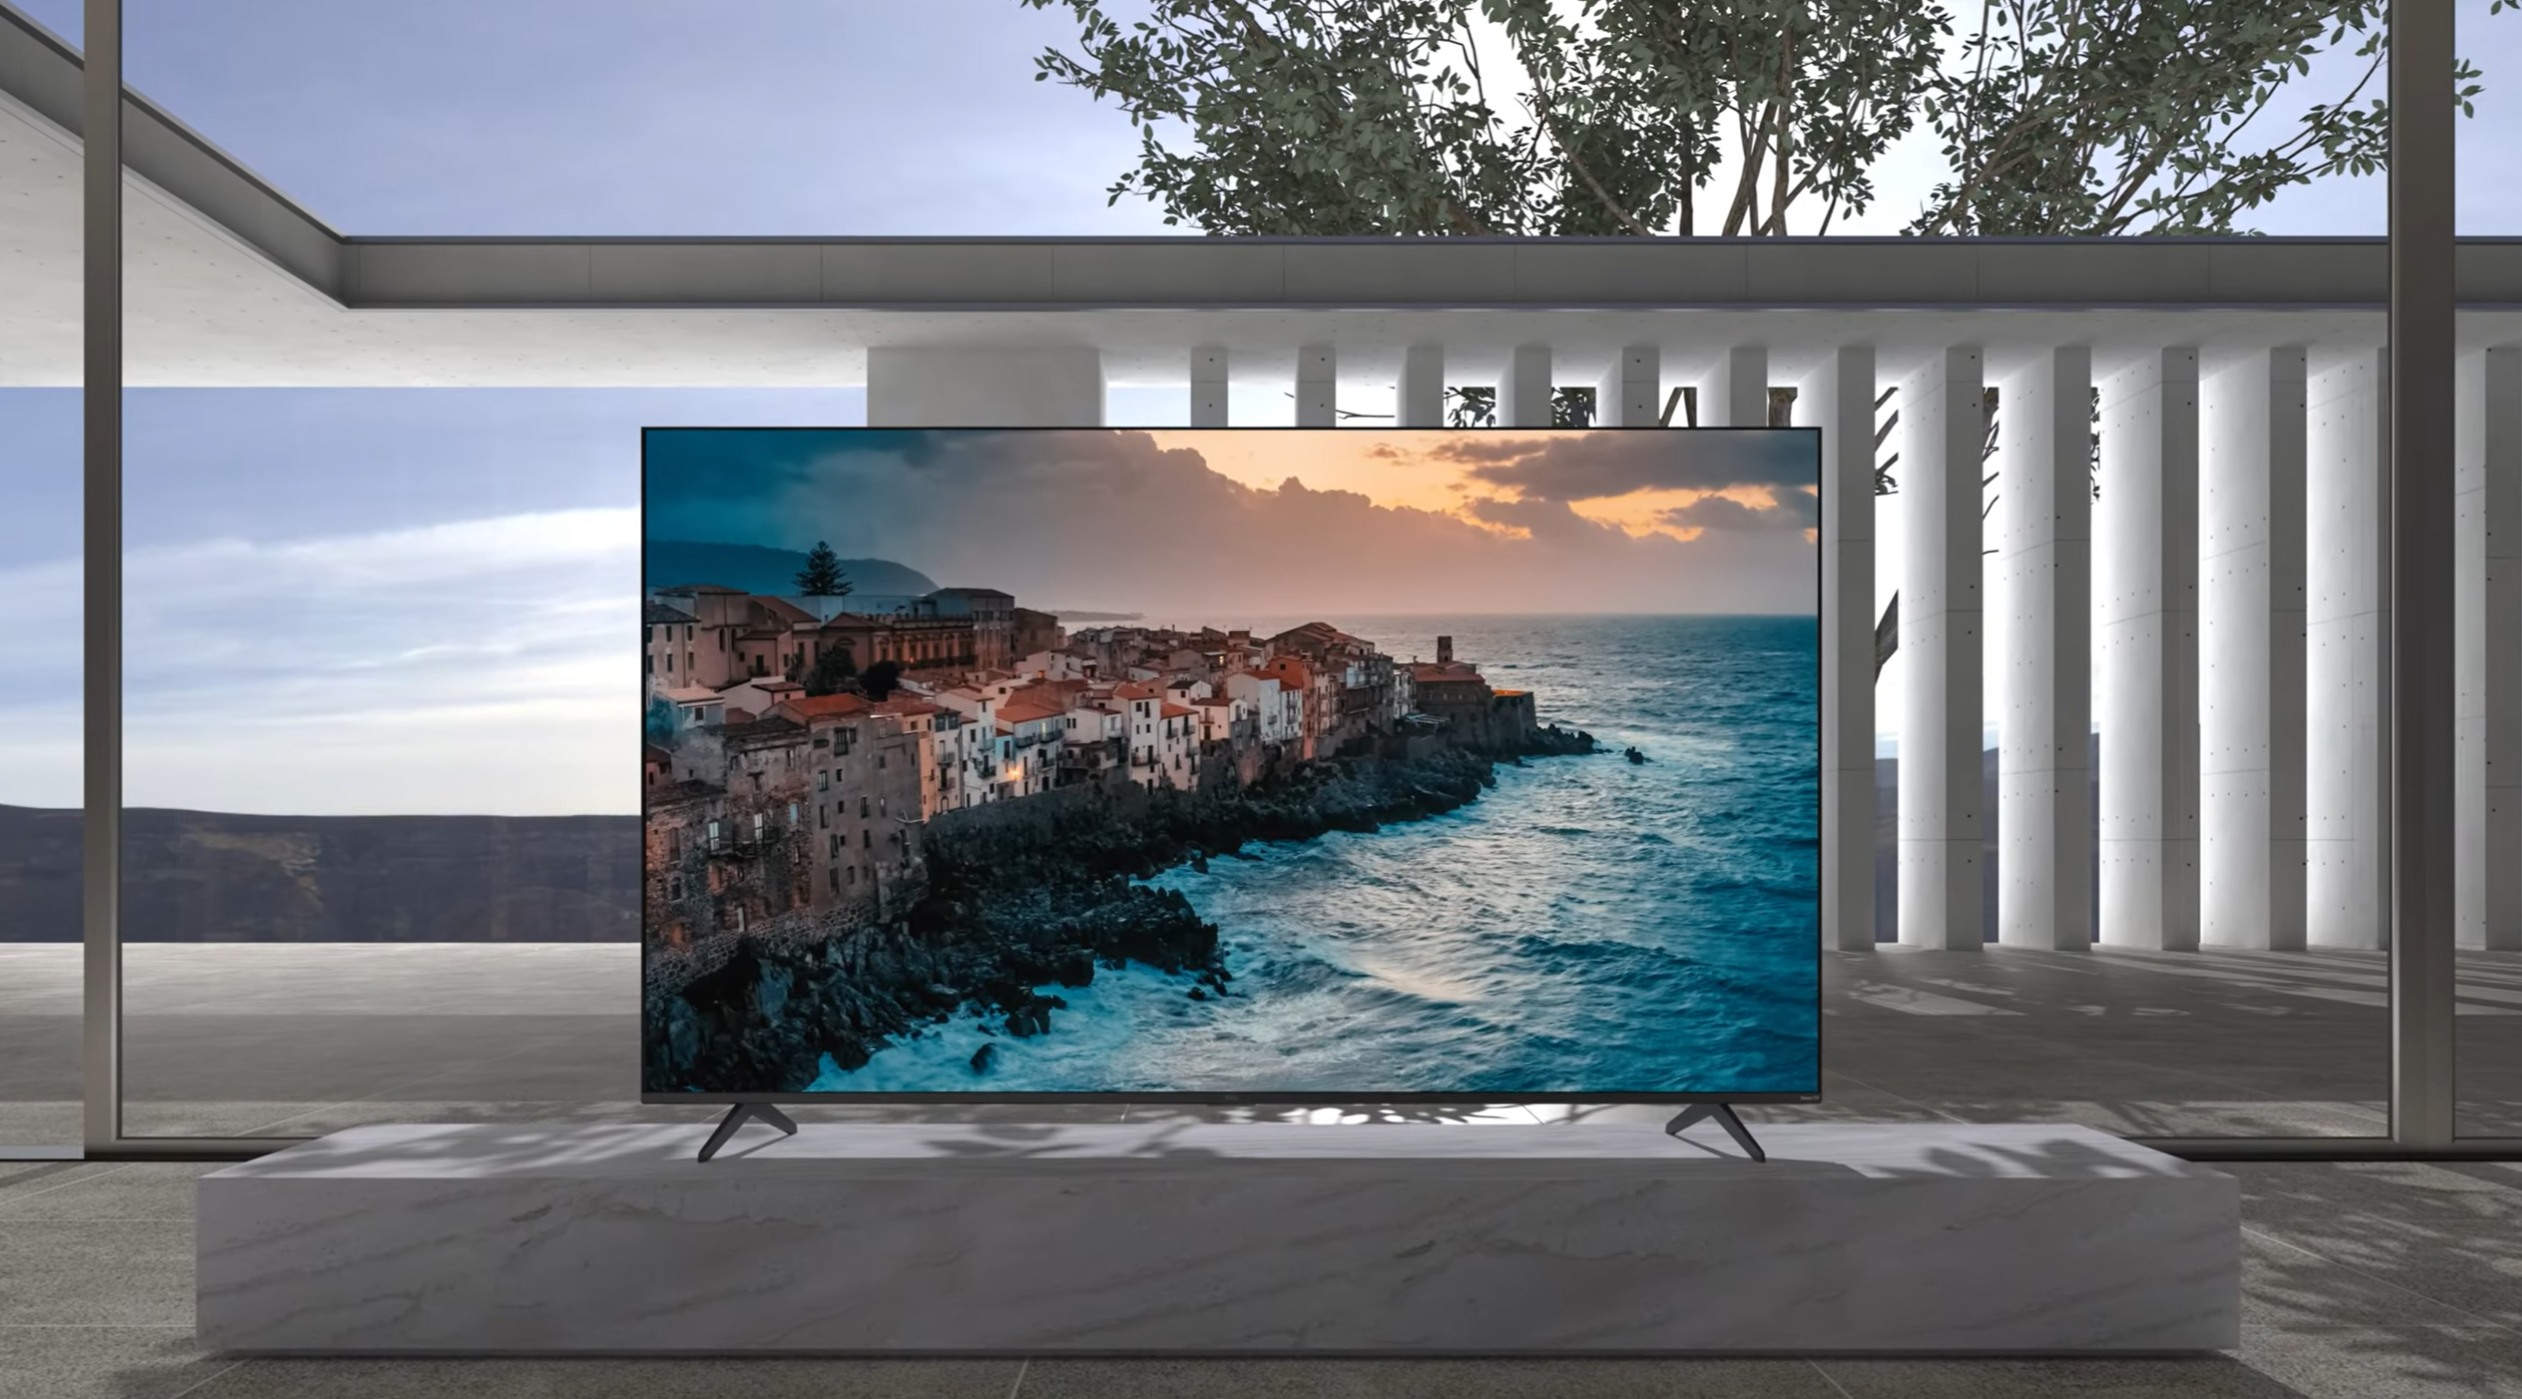 Get a massive 98-inch TCL 4K smart TV for less than $2,500 before 2023 says goodbye